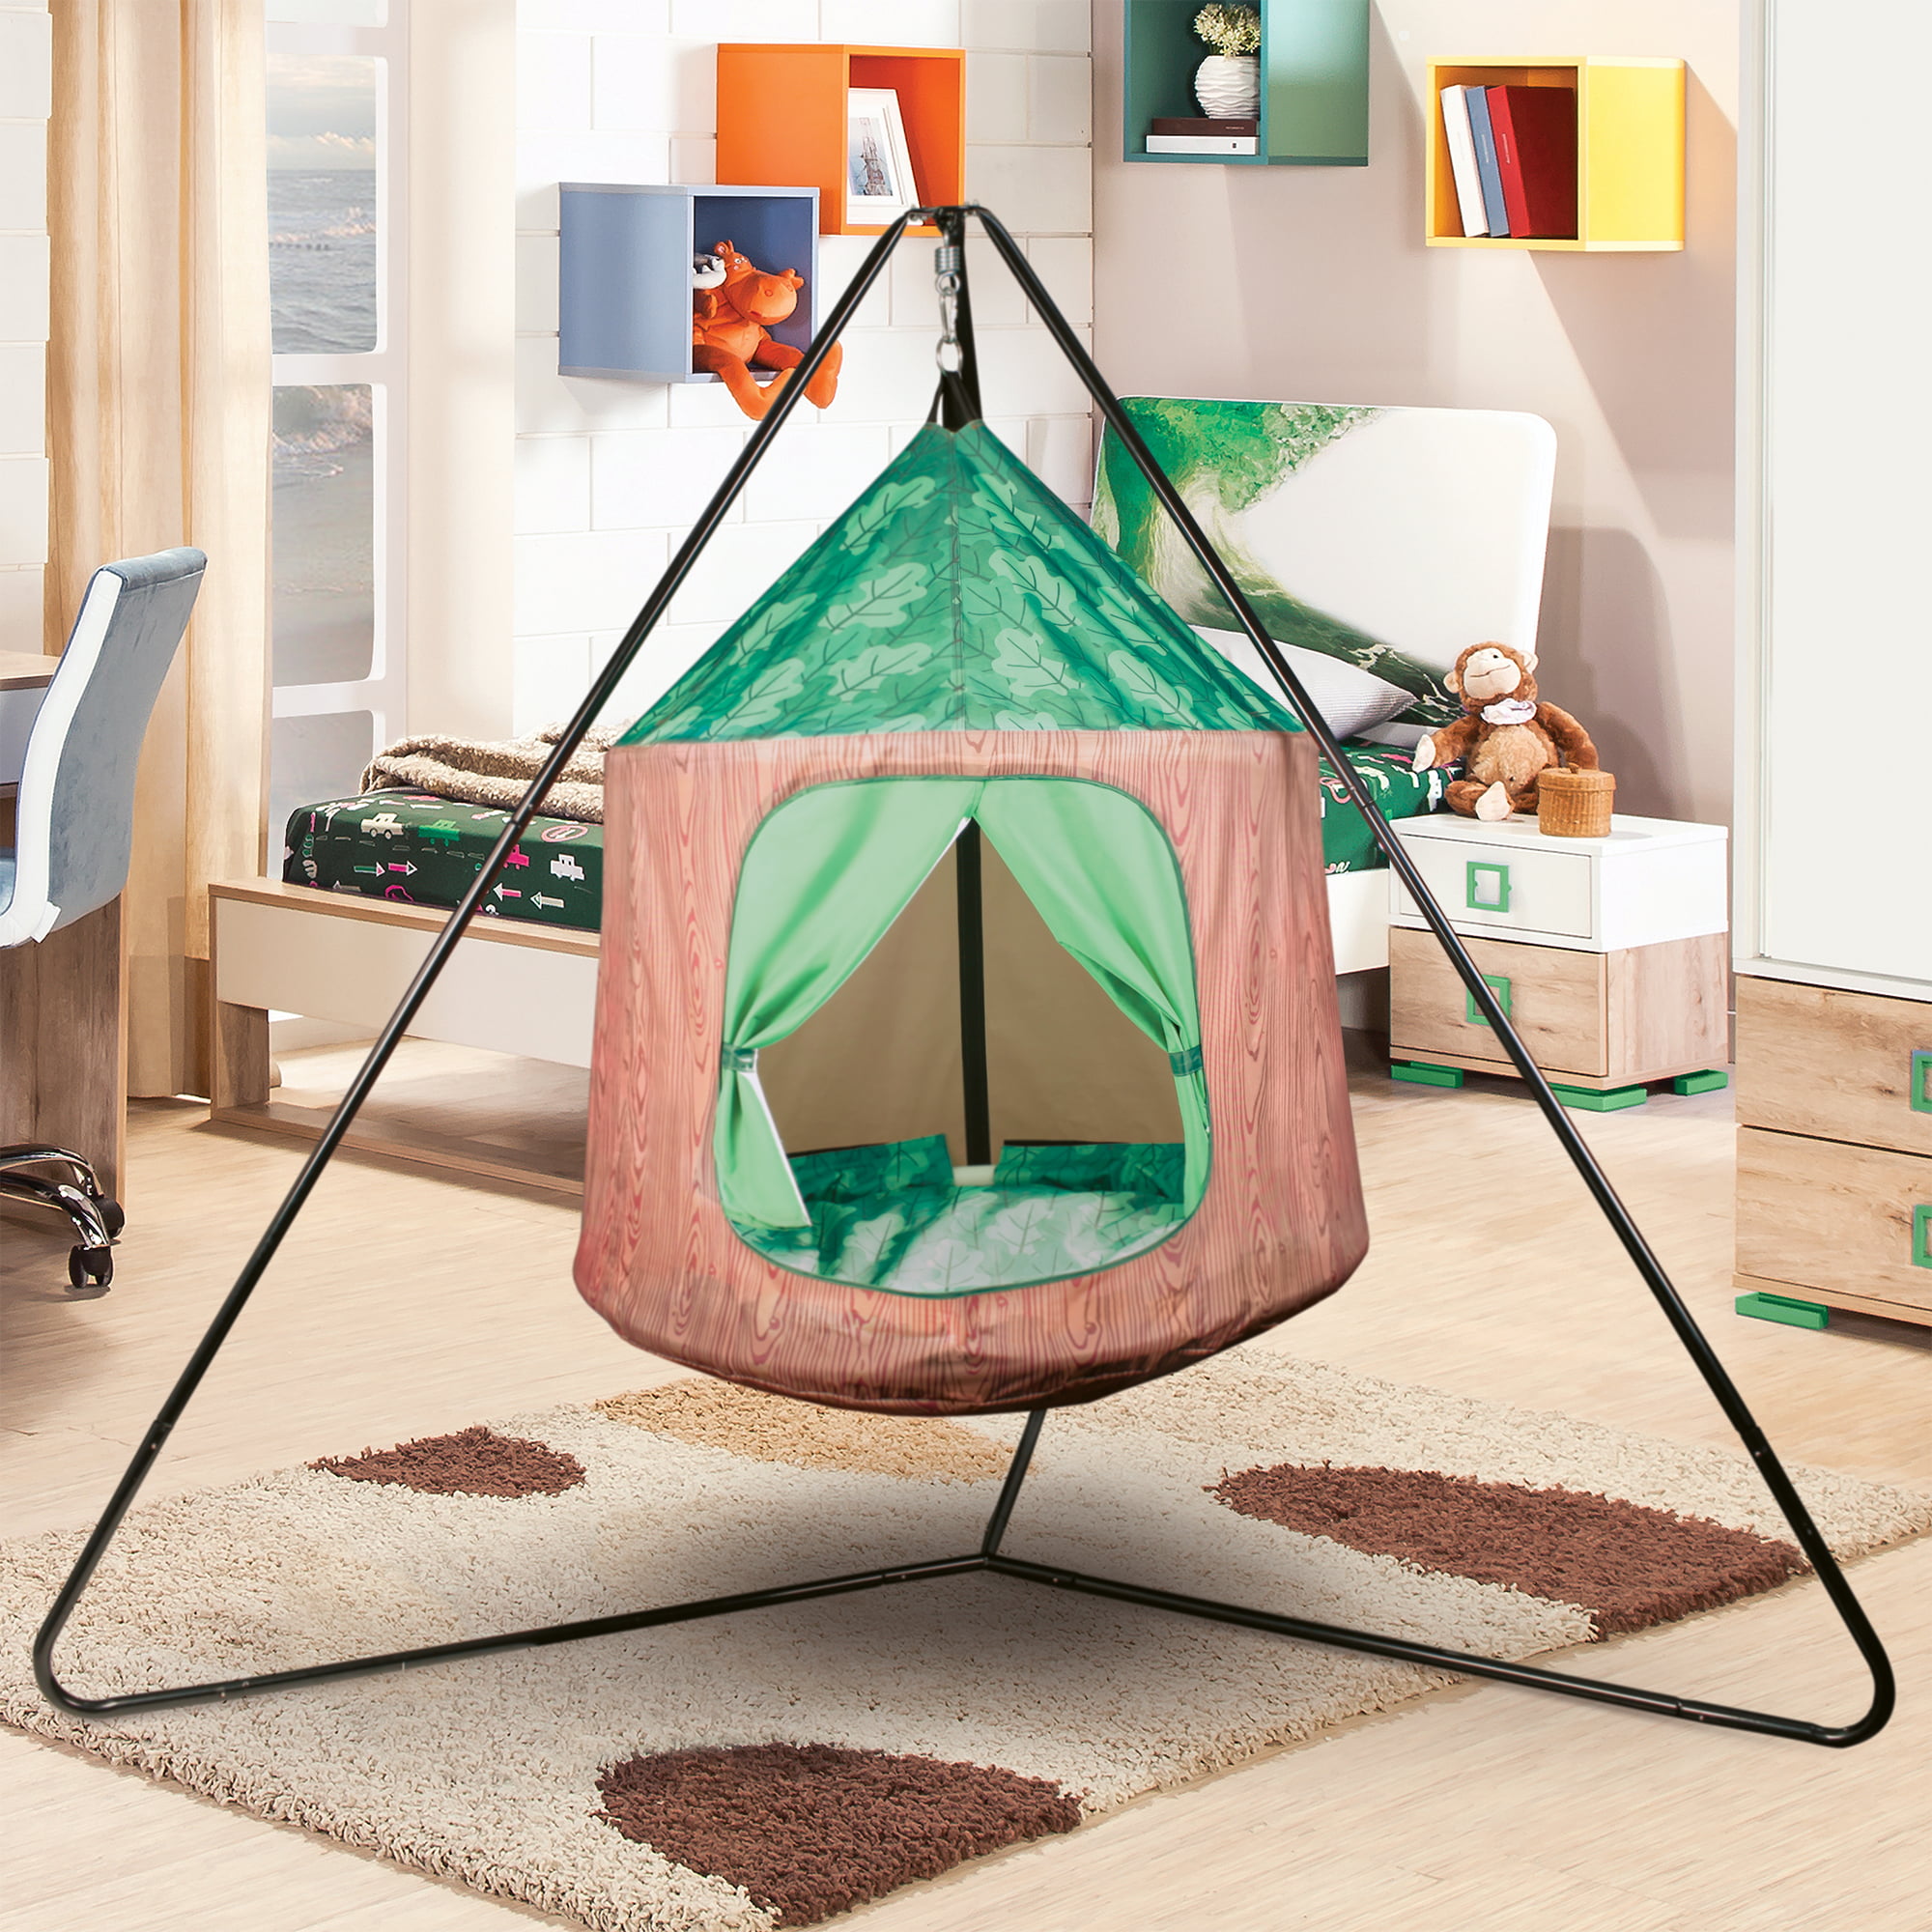 Crckt Kids Polyester Indoor Camping Play Tent with Majestic Design Print,  60L x 36W x 36H 